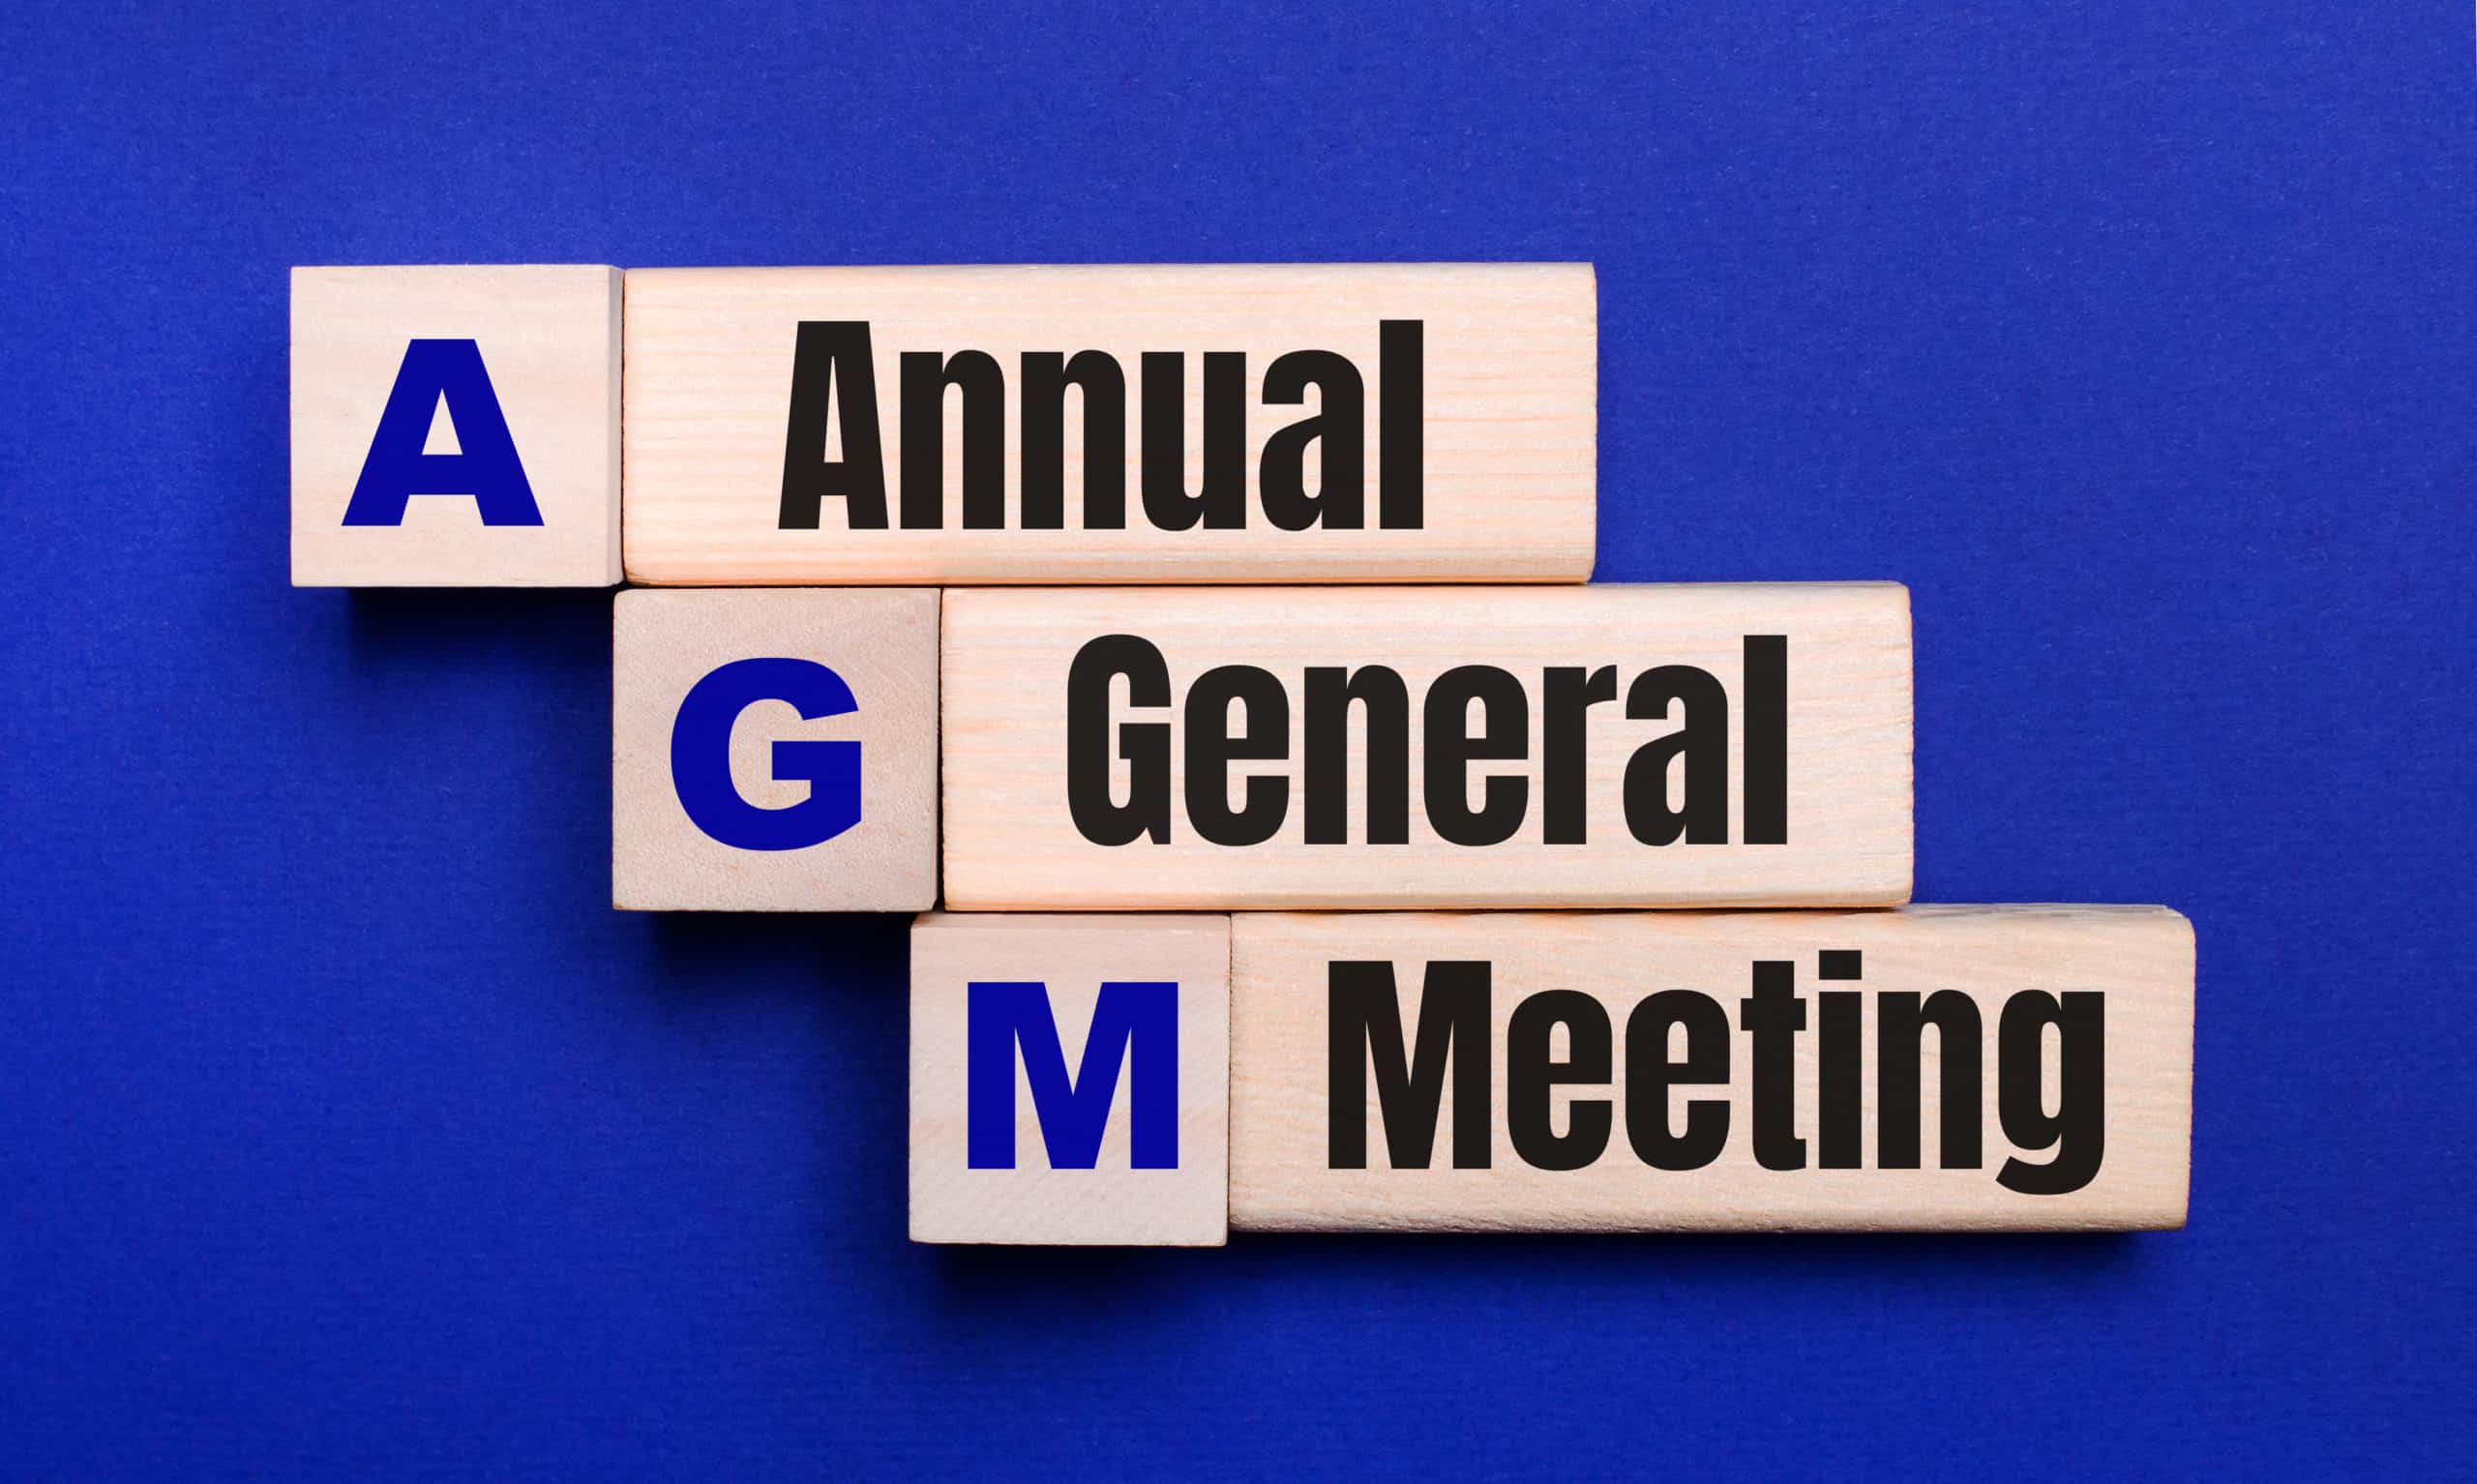 June 21st: Annual General Meeting (Take Two)